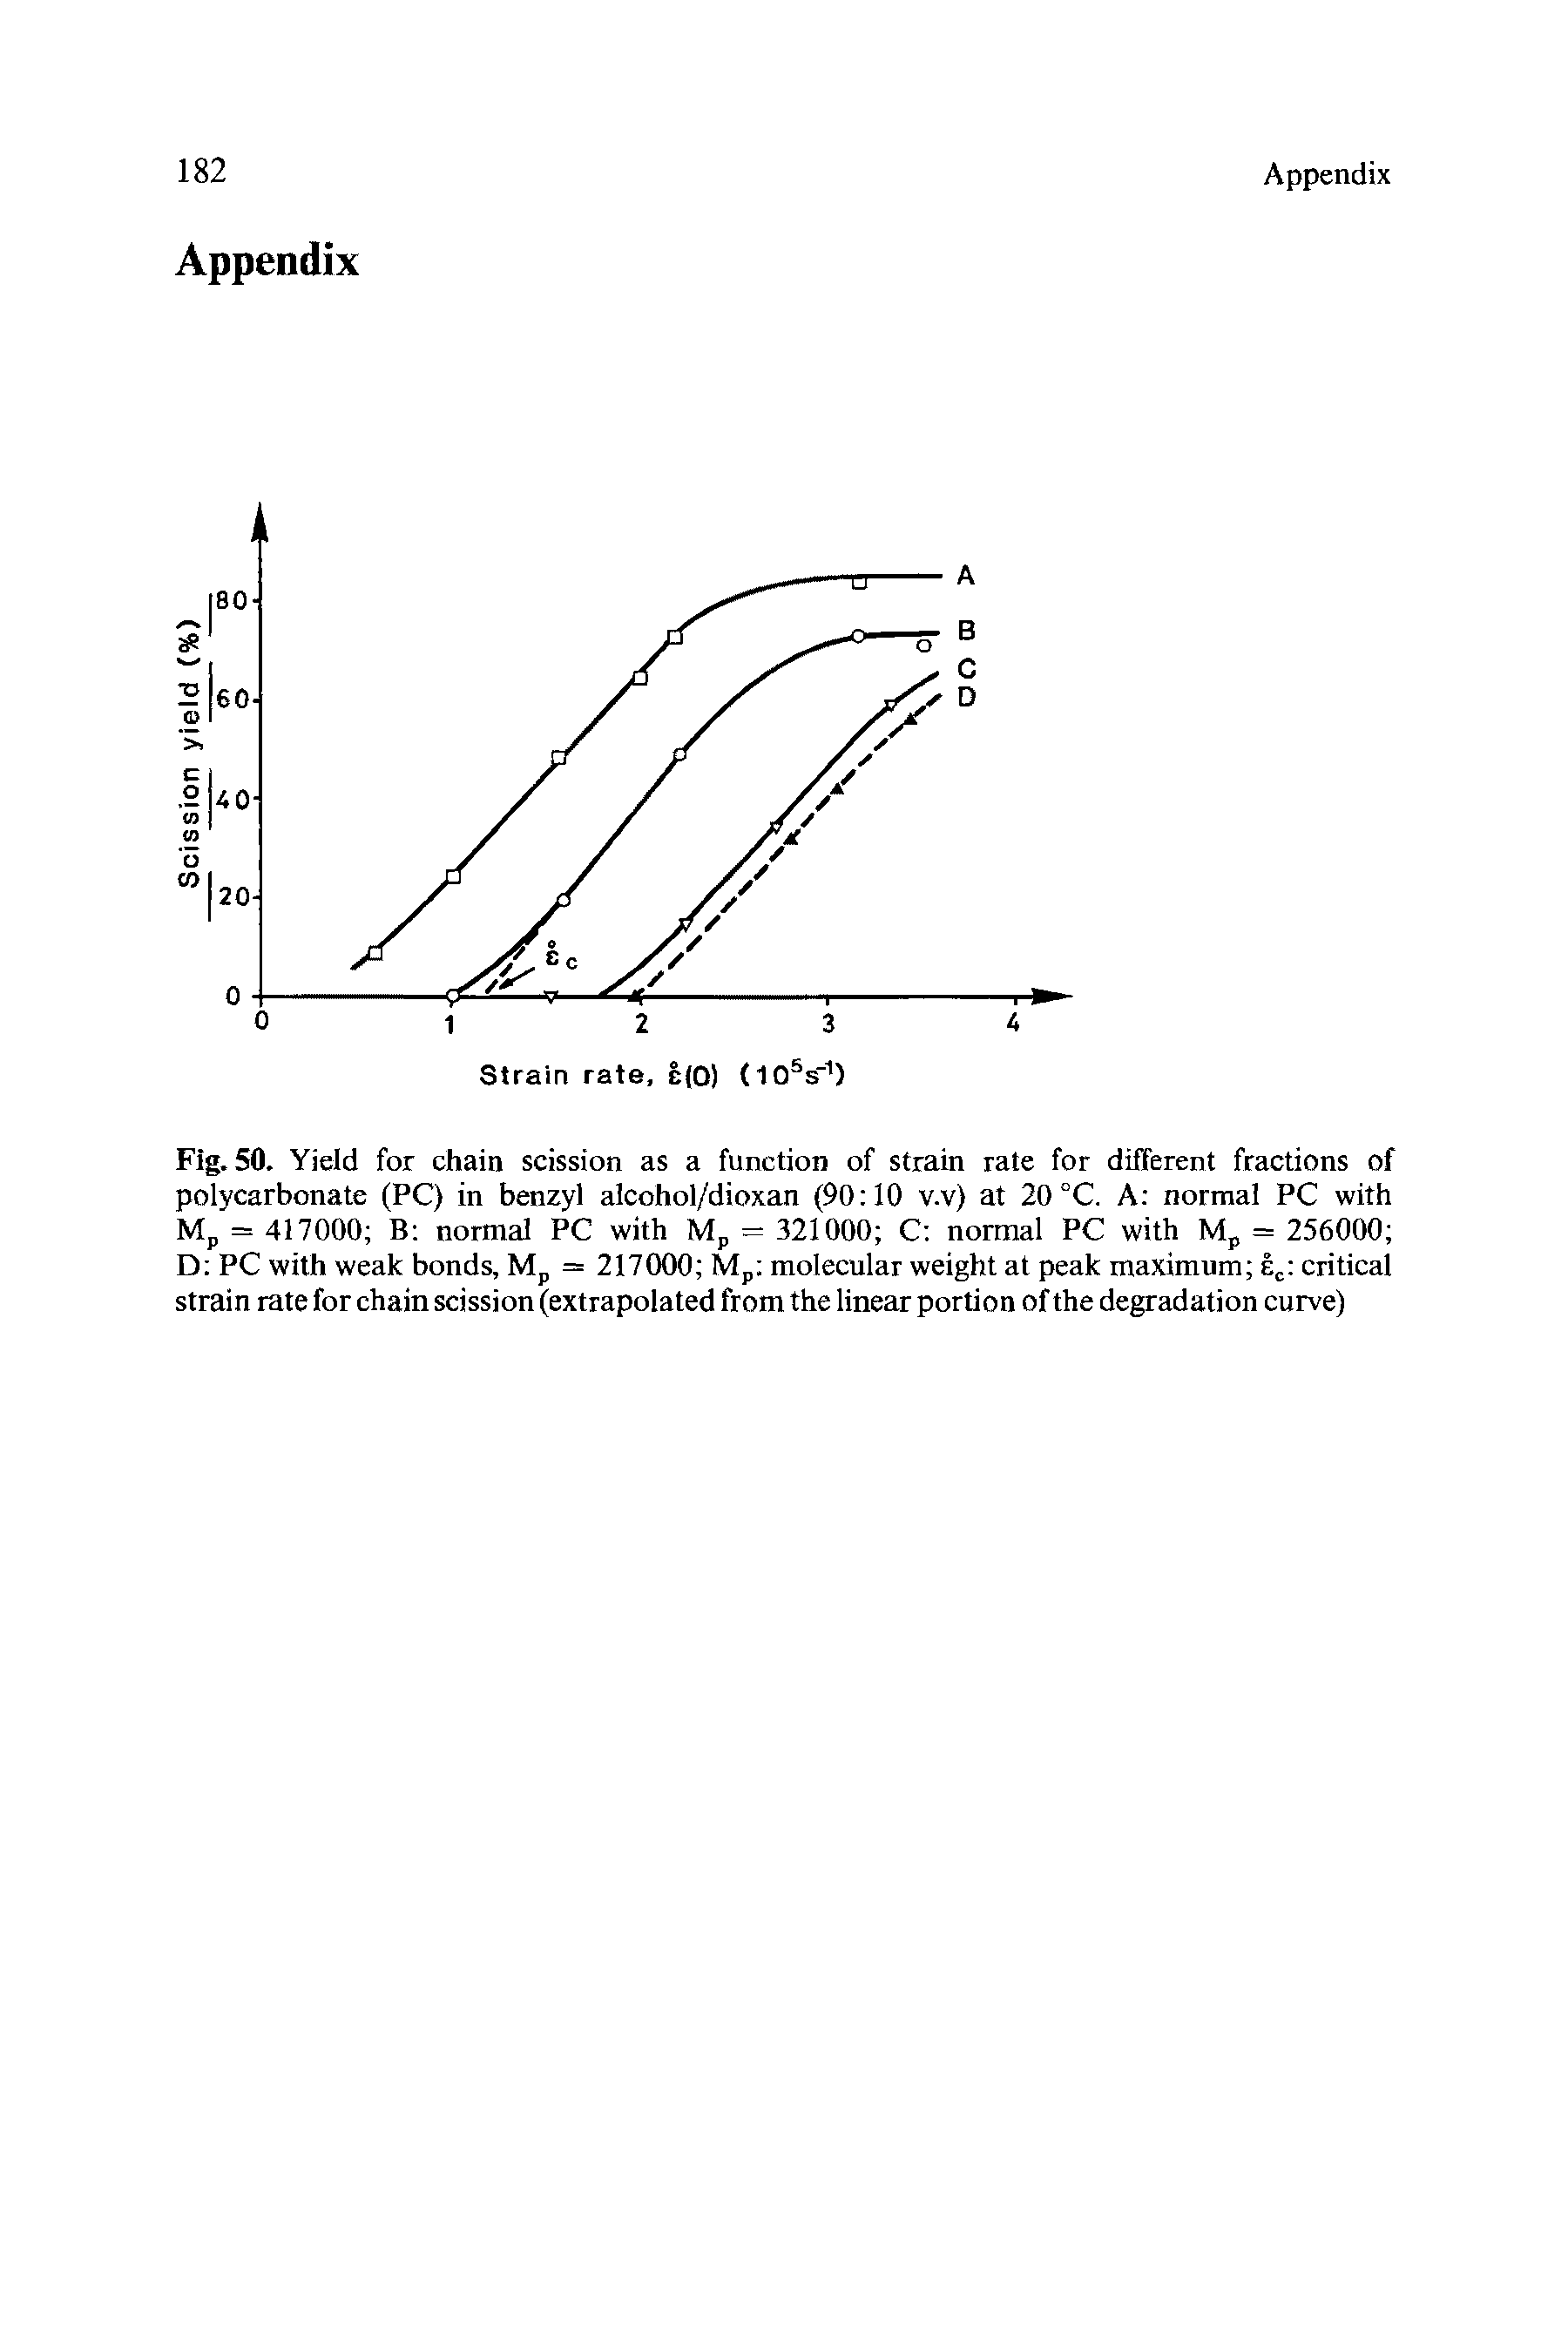 Fig. 50. Yield for chain scission as a function of strain rate for different fractions of polycarbonate (PC) in benzyl alcohol/dioxan (90 10 v.v) at 20 °C. A normal PC with Mp = 417000 B normal PC with Mp = 321000 C normal PC with Mp = 256000 D PC with weak bonds, Mp = 217000 Mp molecular weight at peak maximum sc critical strain rate for chain scission (extrapolated from the linear portion of the degradation curve)...